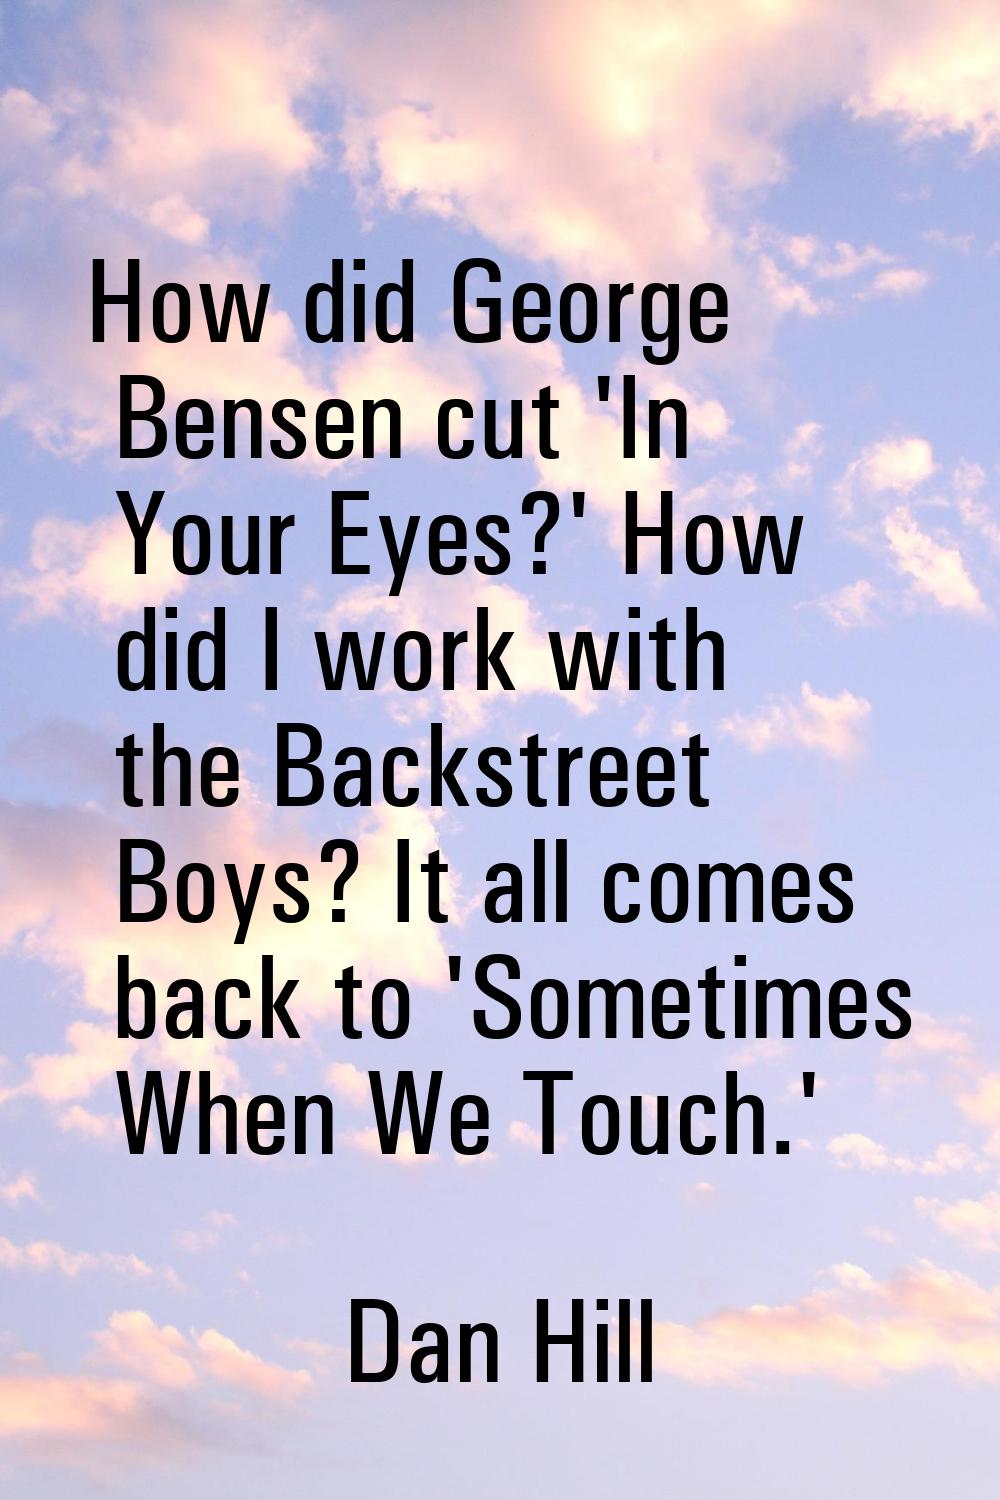 How did George Bensen cut 'In Your Eyes?' How did I work with the Backstreet Boys? It all comes bac